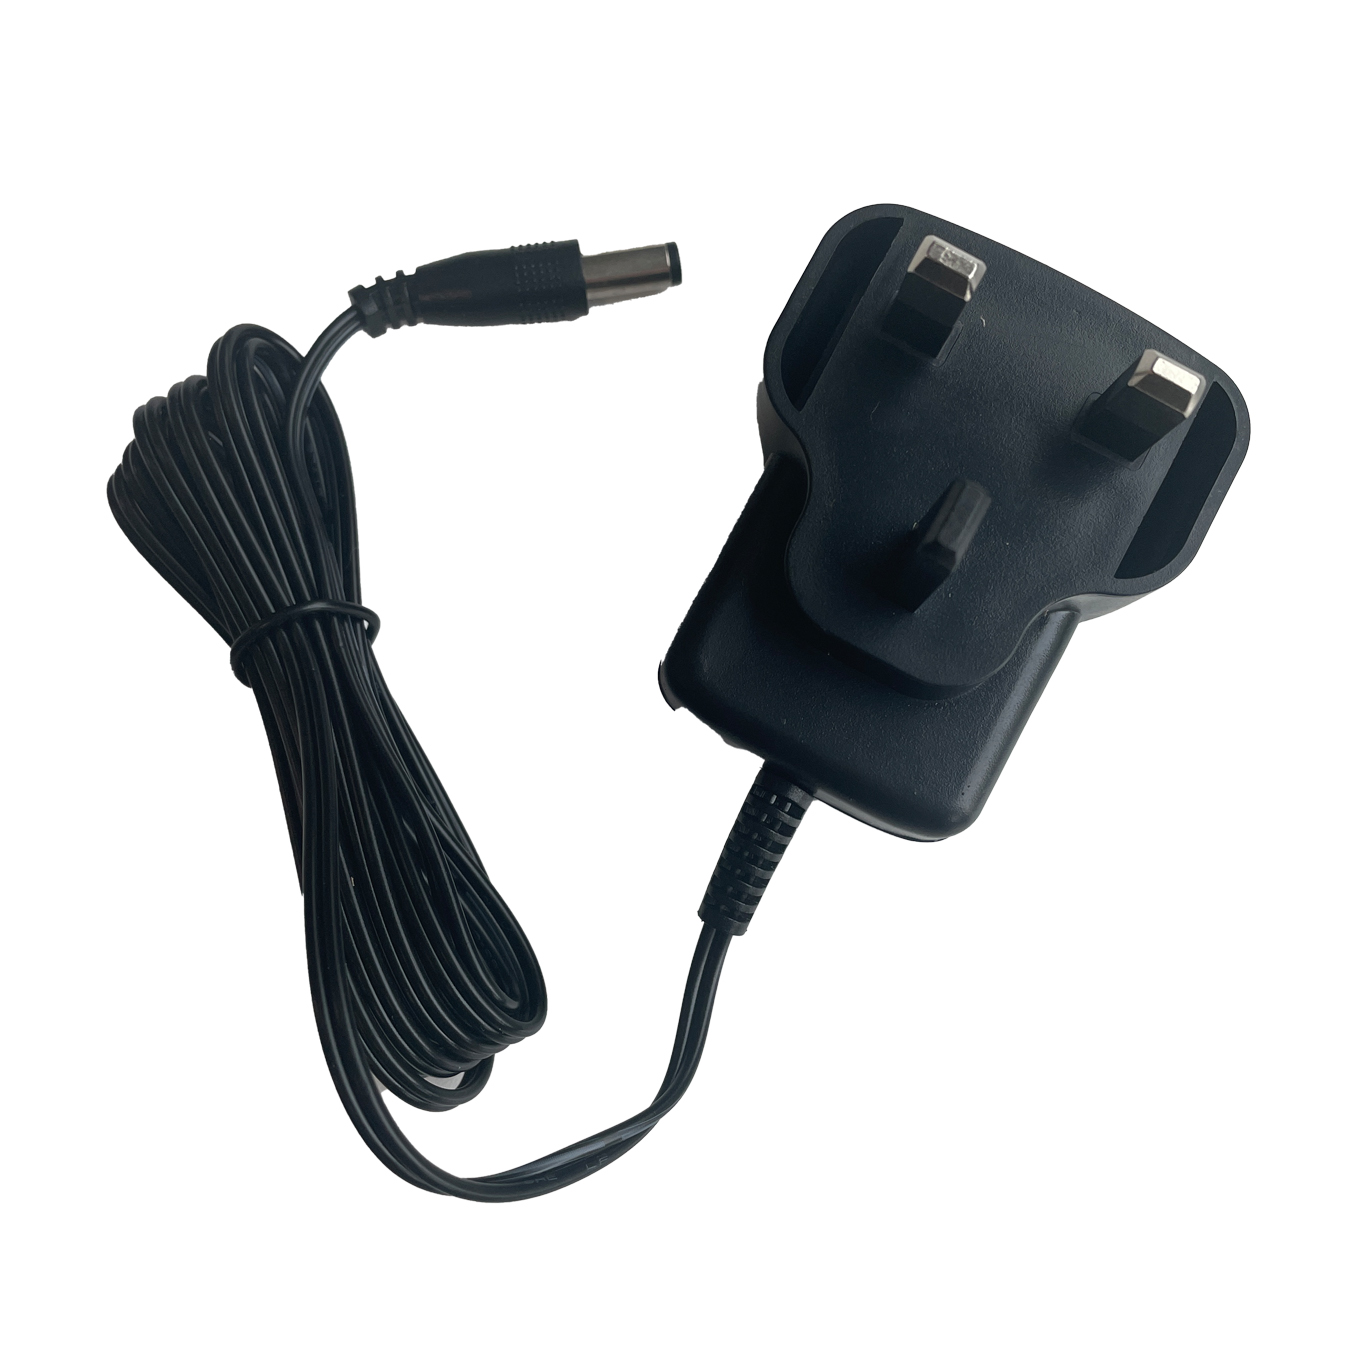 View Floating Mop Replacement Charger information